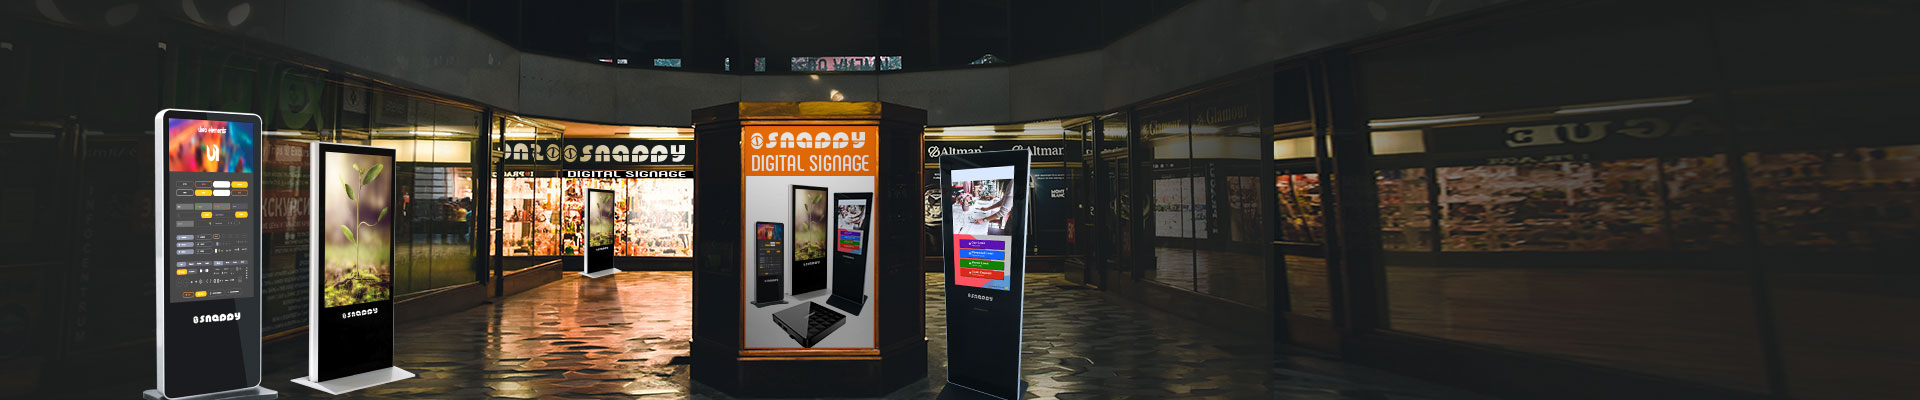 digital-signage-software-features